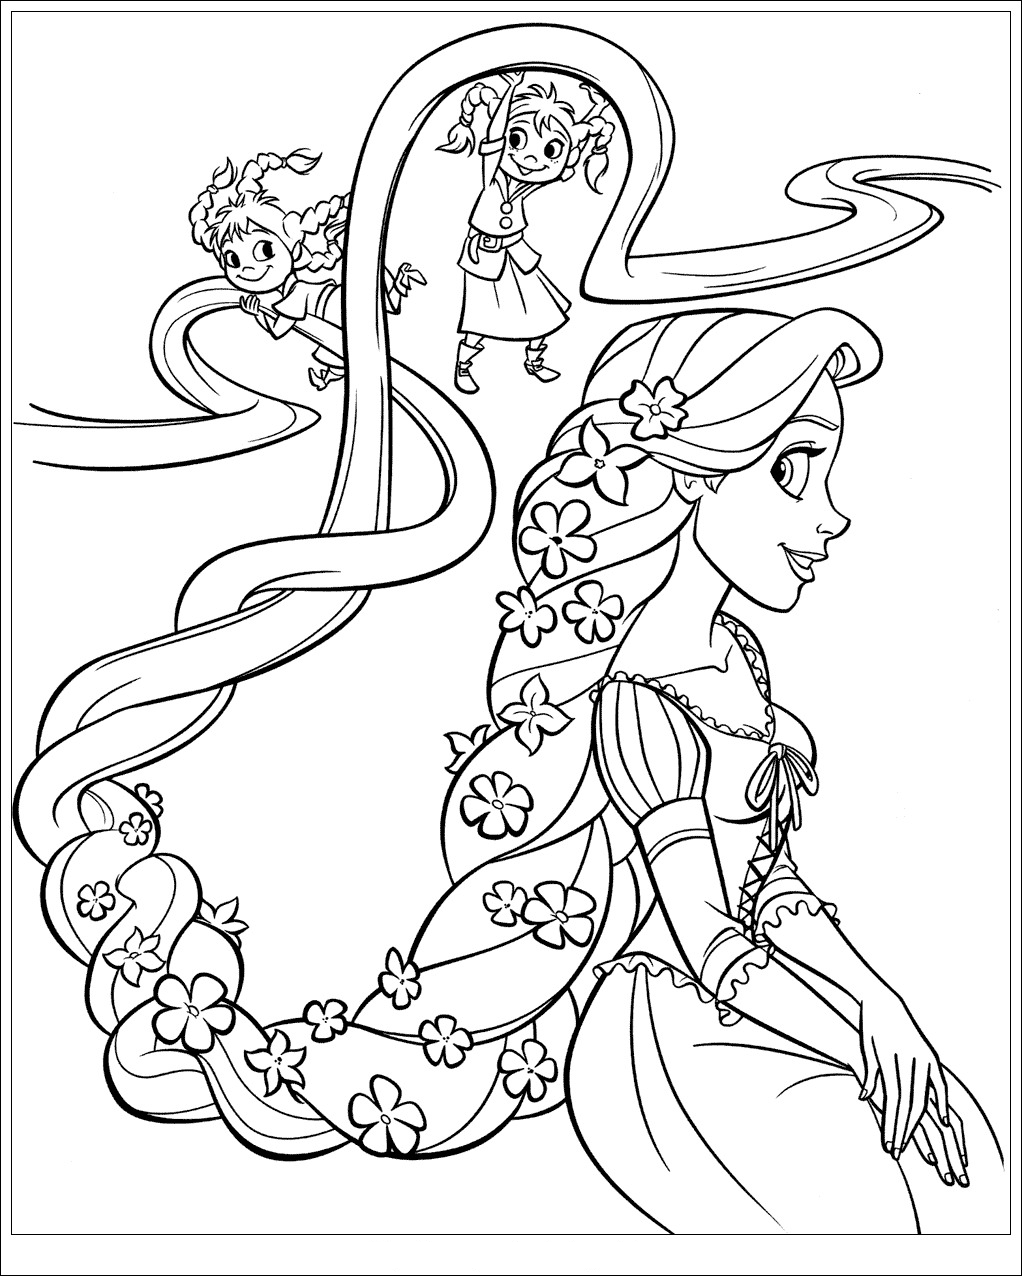 Download Tangled free to color for children - Tangled Kids Coloring ...